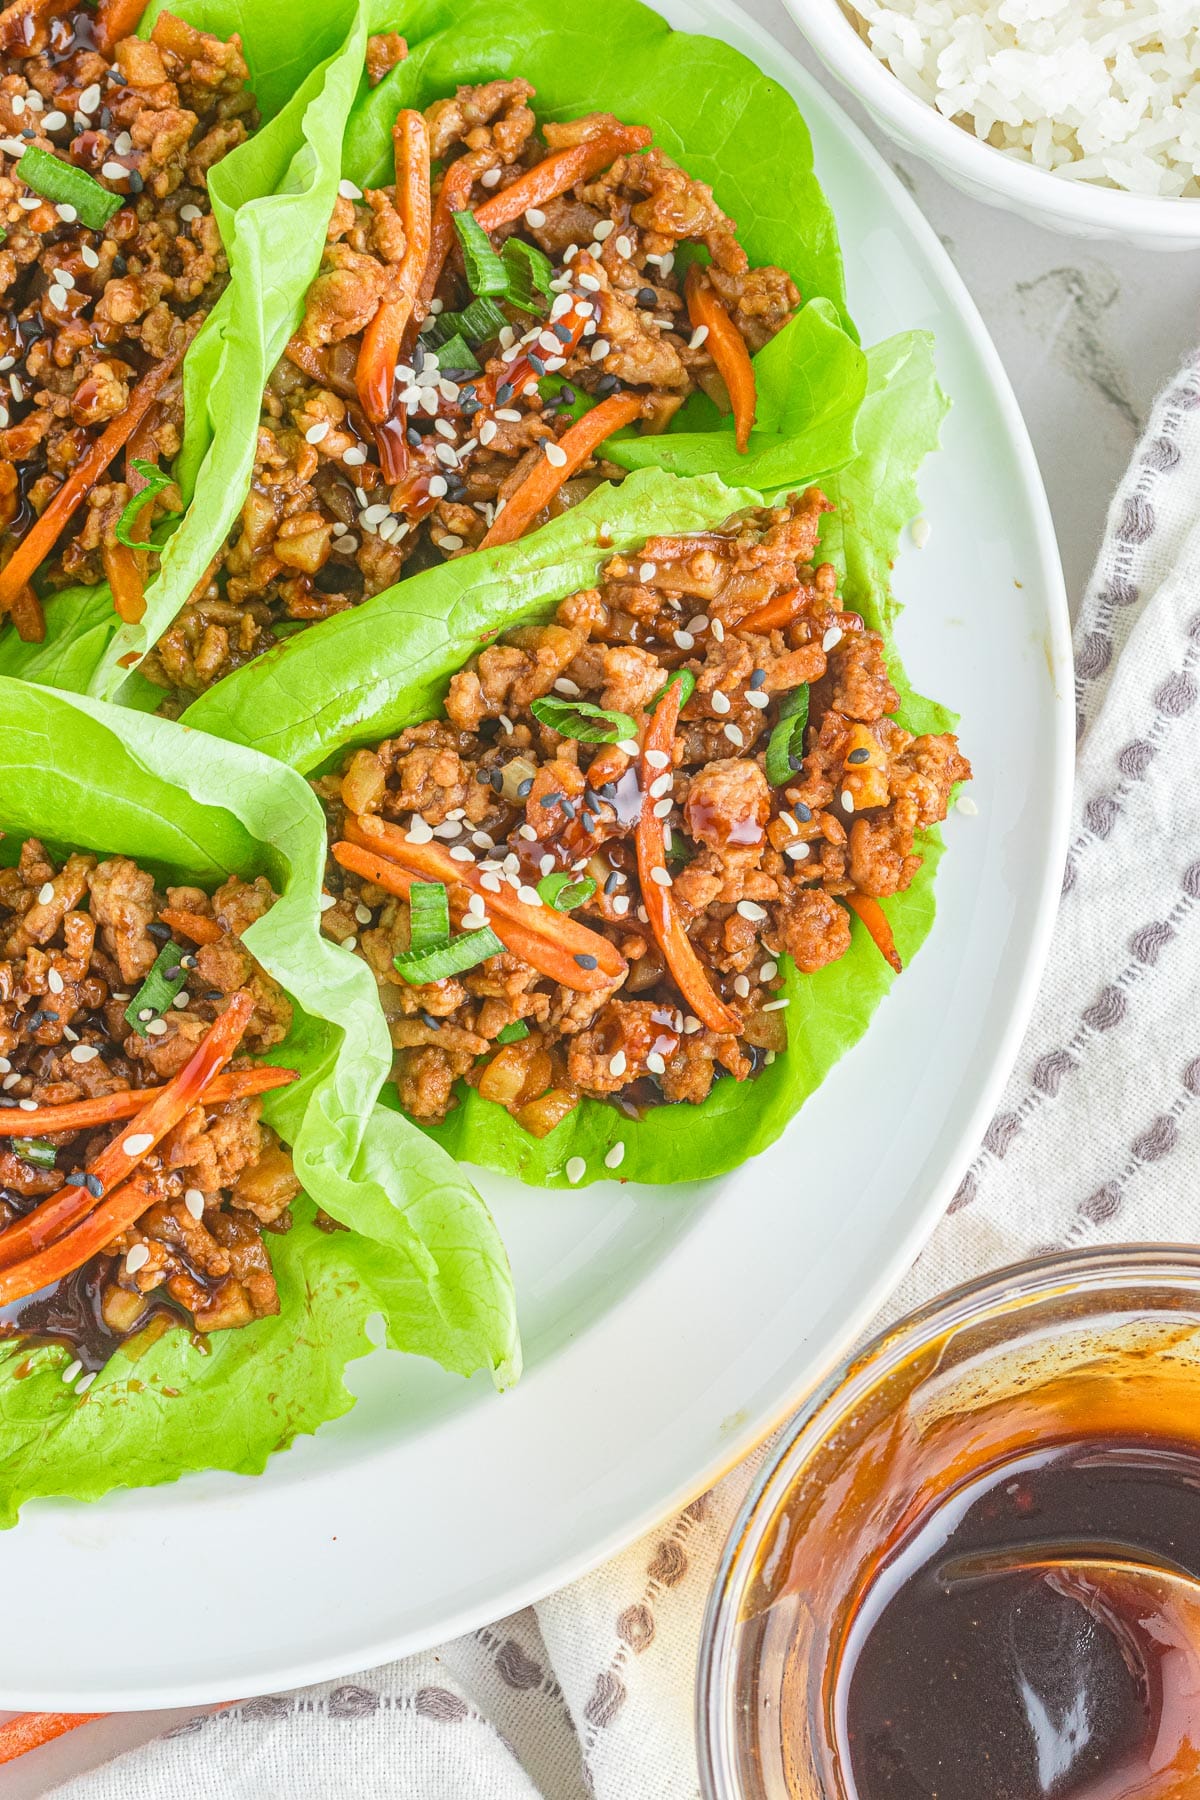 Asian-style pork lettuce wraps filled with ground meat and vegetables, garnished with sesame seeds, served with rice and dipping sauce on the side of a plate.